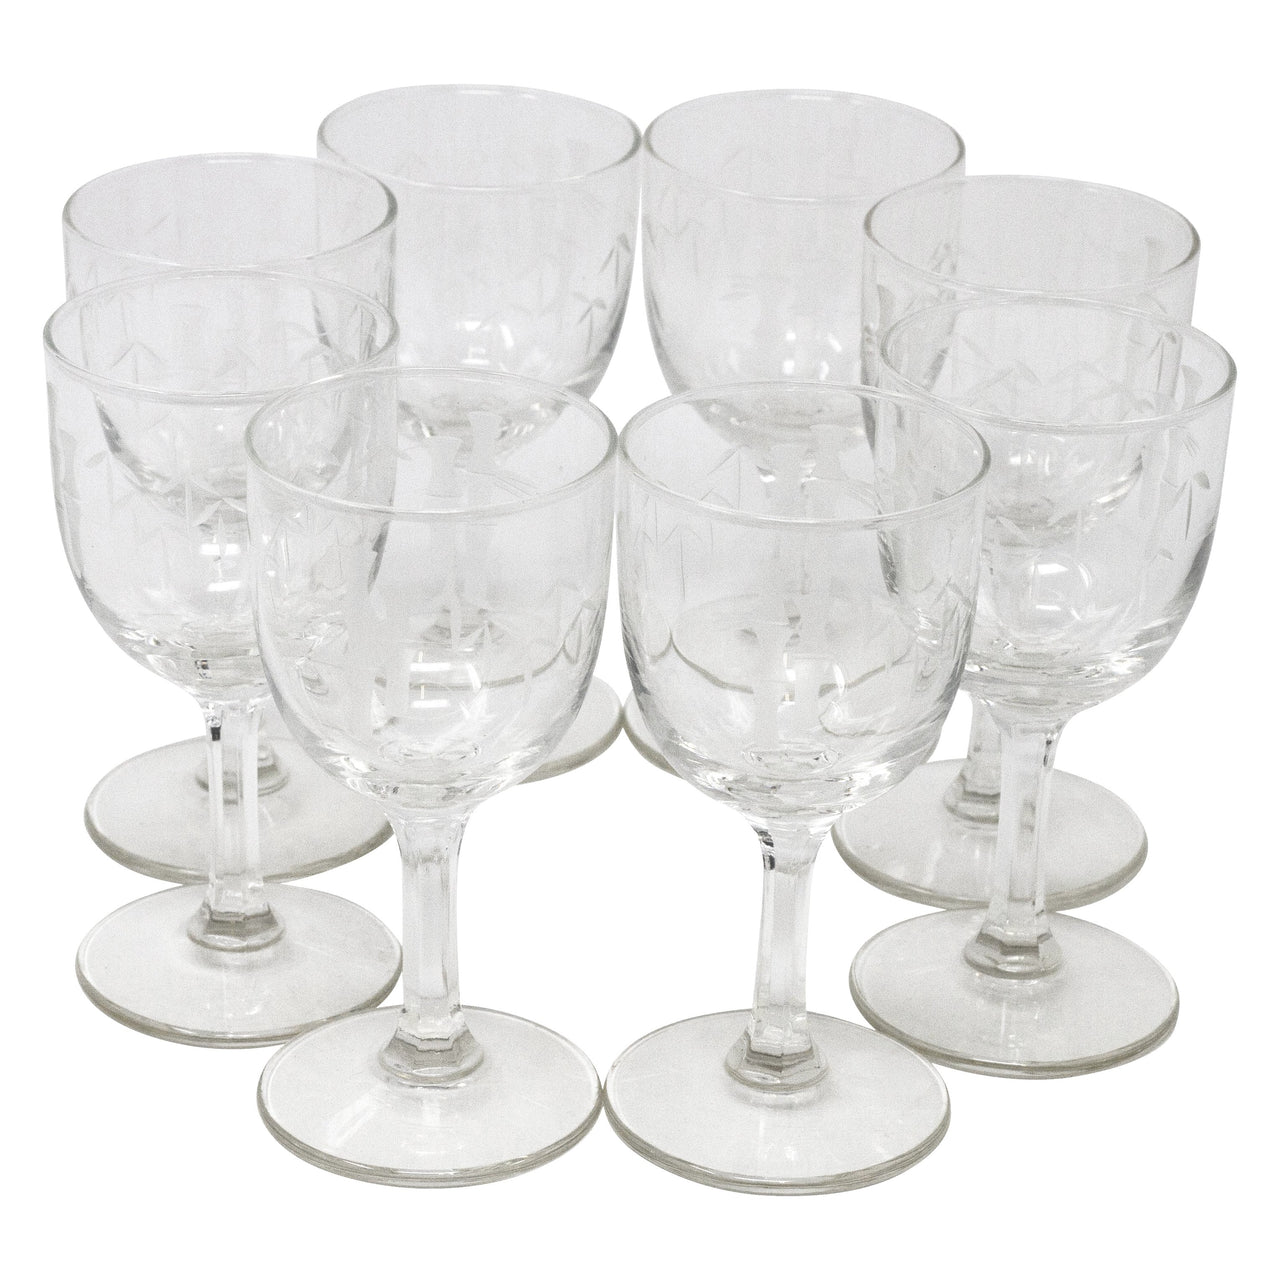 Vintage Sasaki Etched Bamboo Sherry Glasses | The Hour Shop